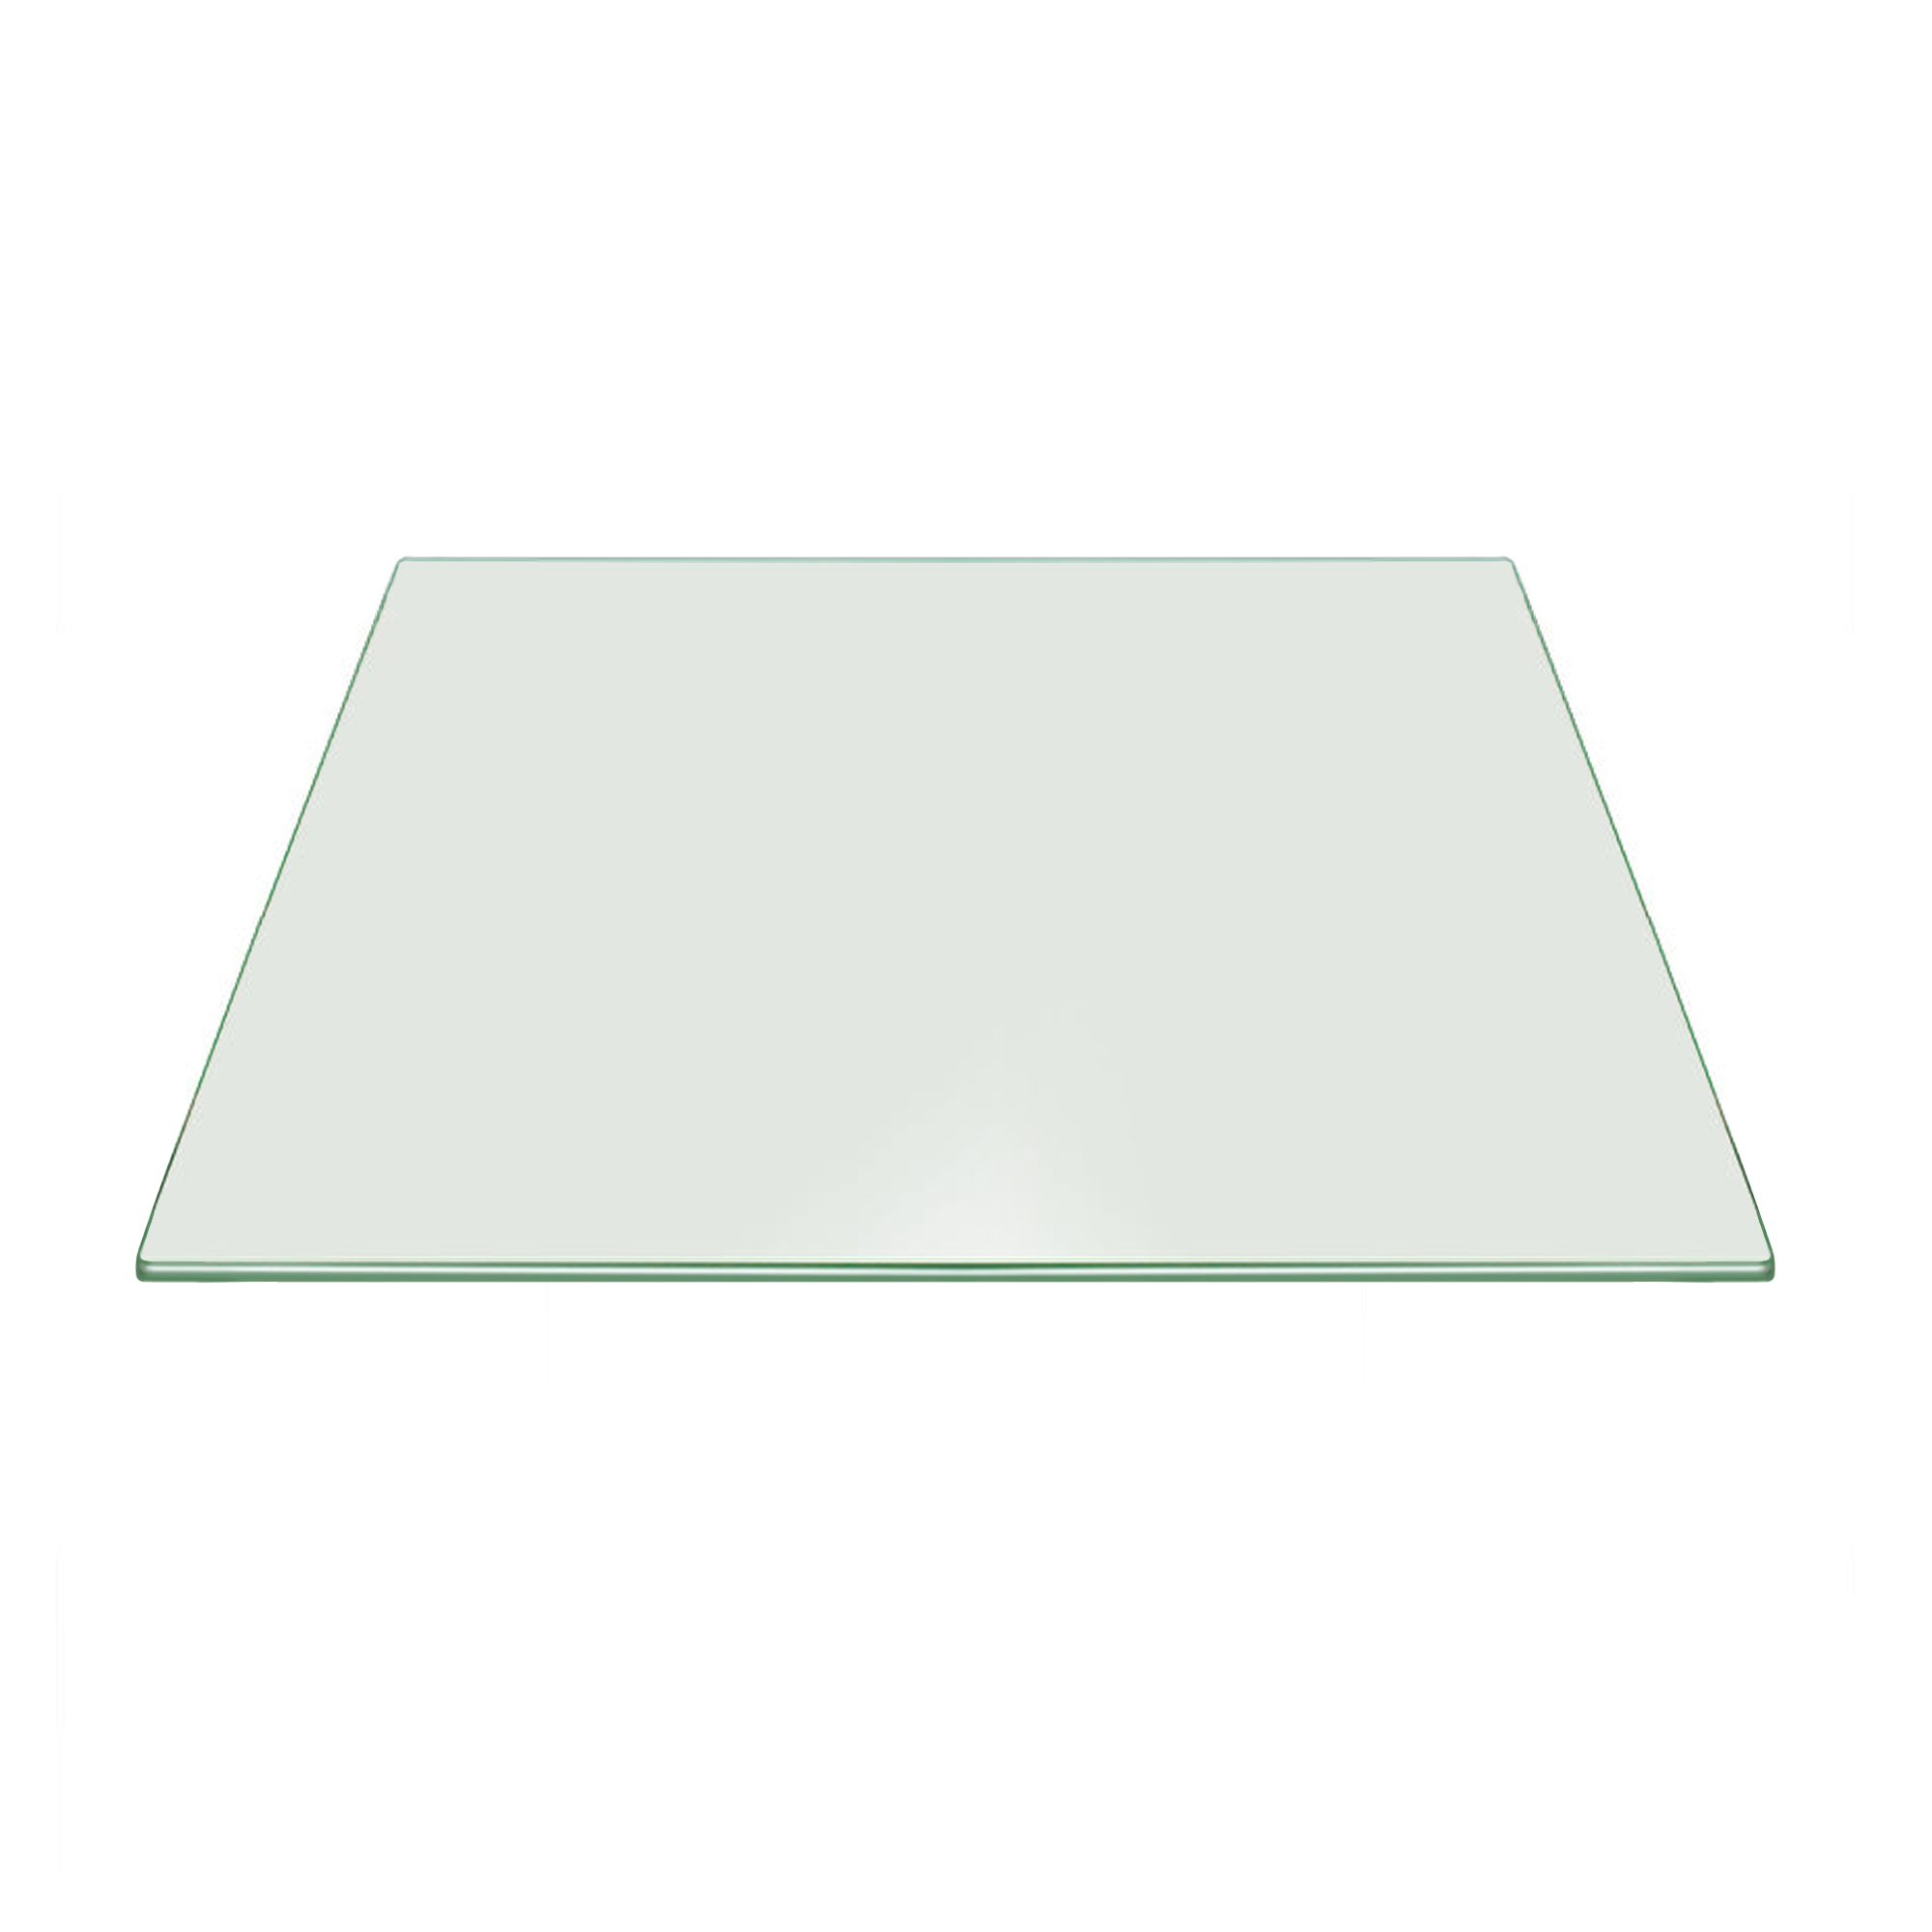 Glass Table Tops Cover, Round Table Top Glass Protector